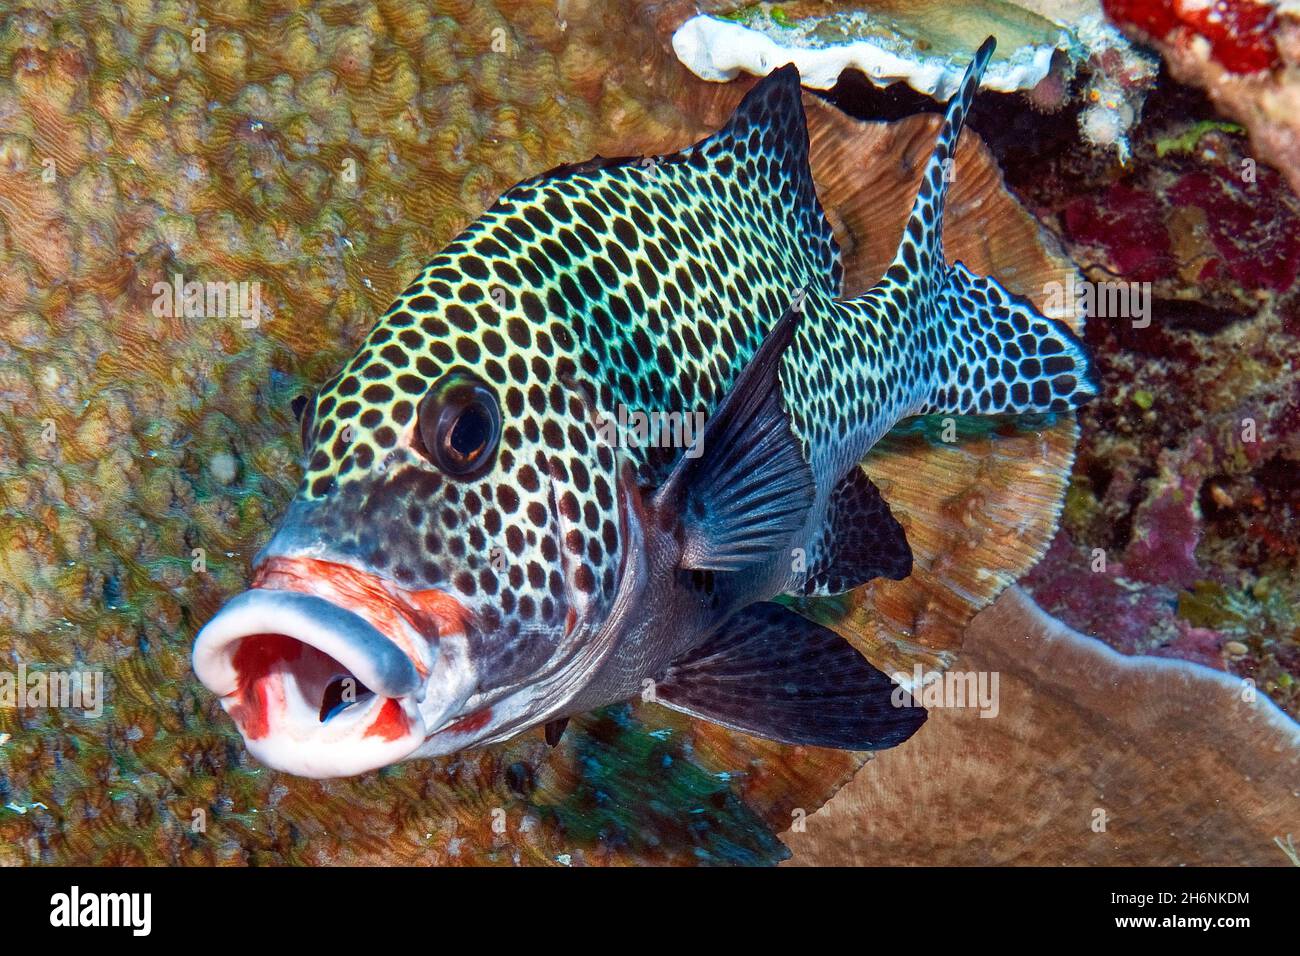 Harlequin sweetlip (Plectorhinchus chaetodonoides) opens mouth for bluestreak cleaner wrasse (Labroides dimidiatus), Pacific Ocean, Yap Island Stock Photo